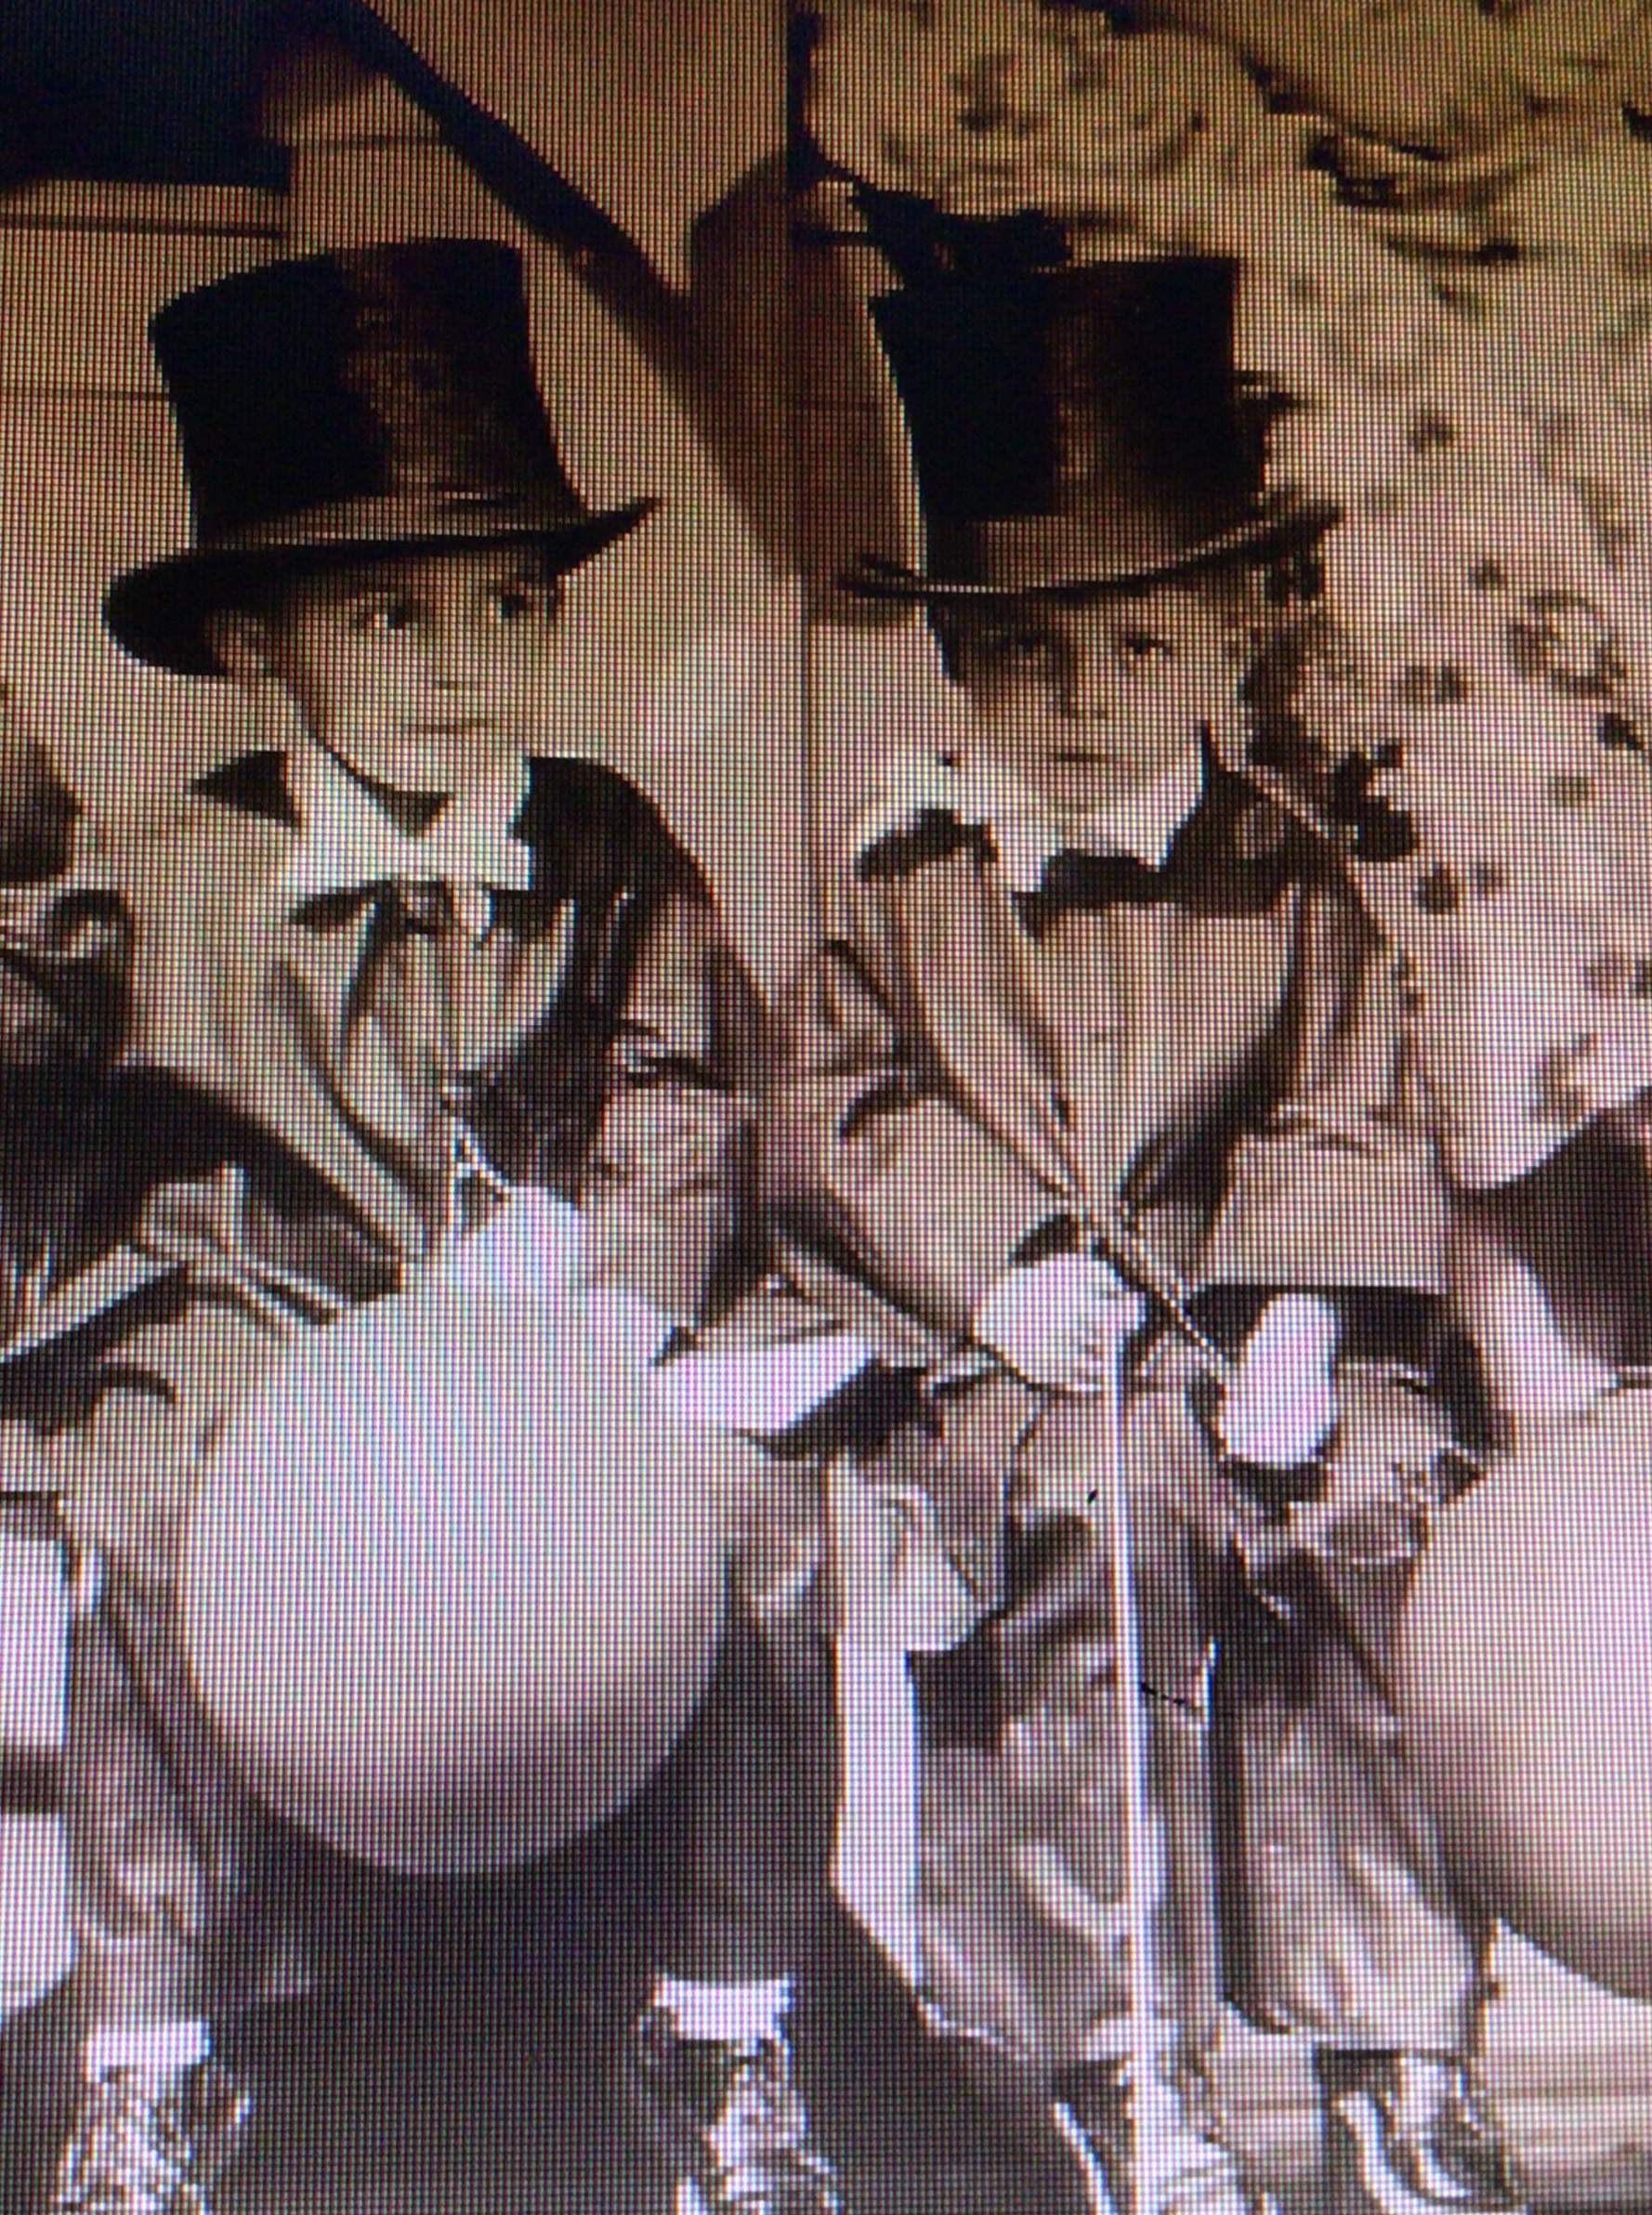 Twin brothers William and Charles Zulker win First Prize in Stone Harbor NJ Baby Parade 1931